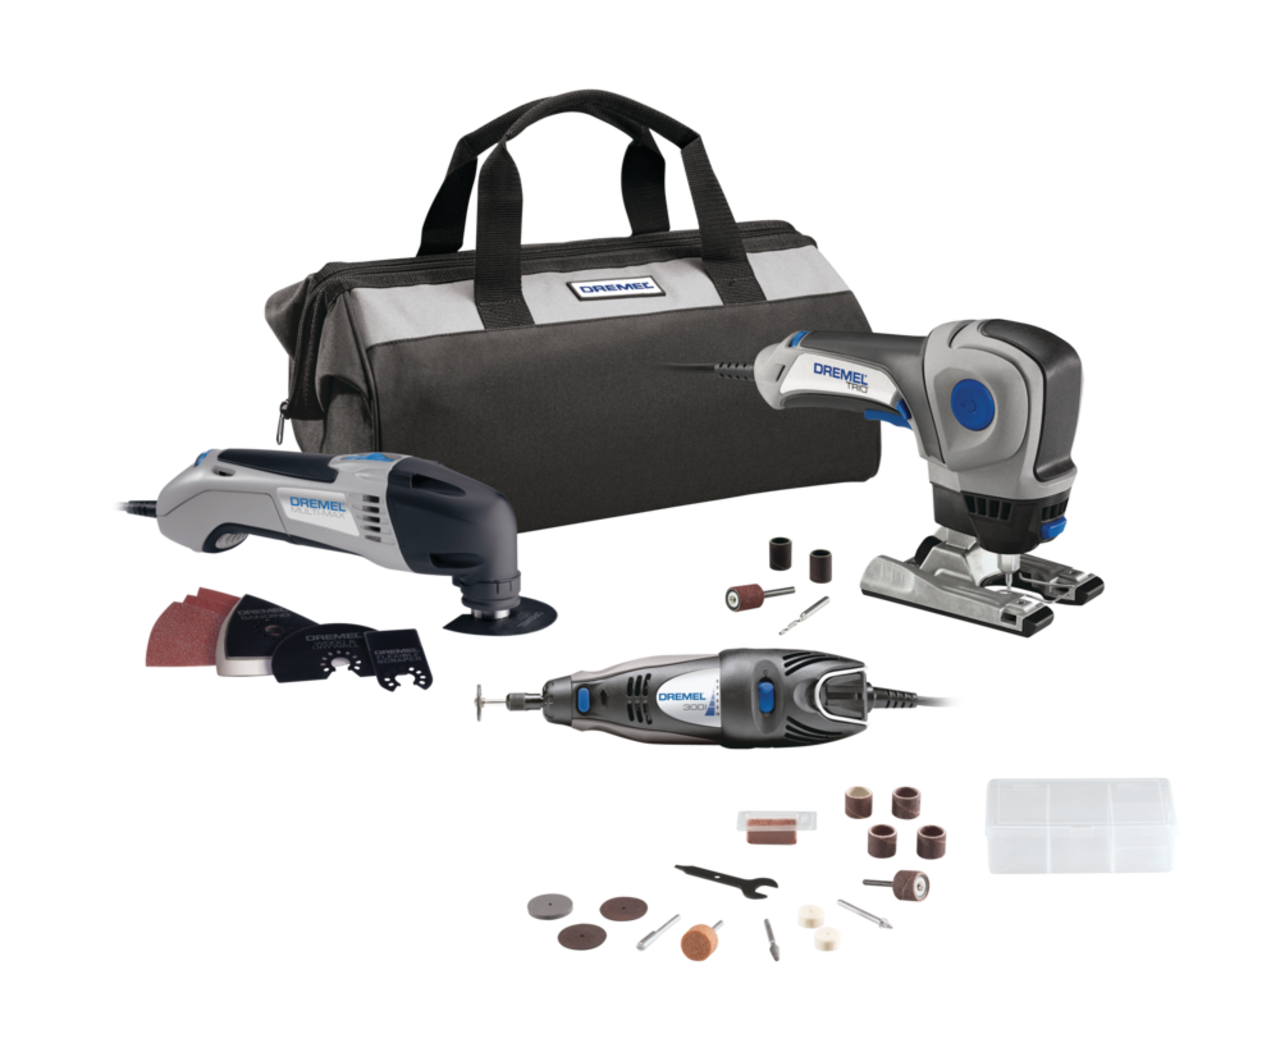 https://media-www.canadiantire.ca/product/fixing/tools/portable-power-tools/1994718/dremel-3pc-combo-kit-6300-04-multi-max-trio-300-rotary-745dcca3-42b1-45c2-840d-70efde02b899.png?imdensity=1&imwidth=640&impolicy=mZoom